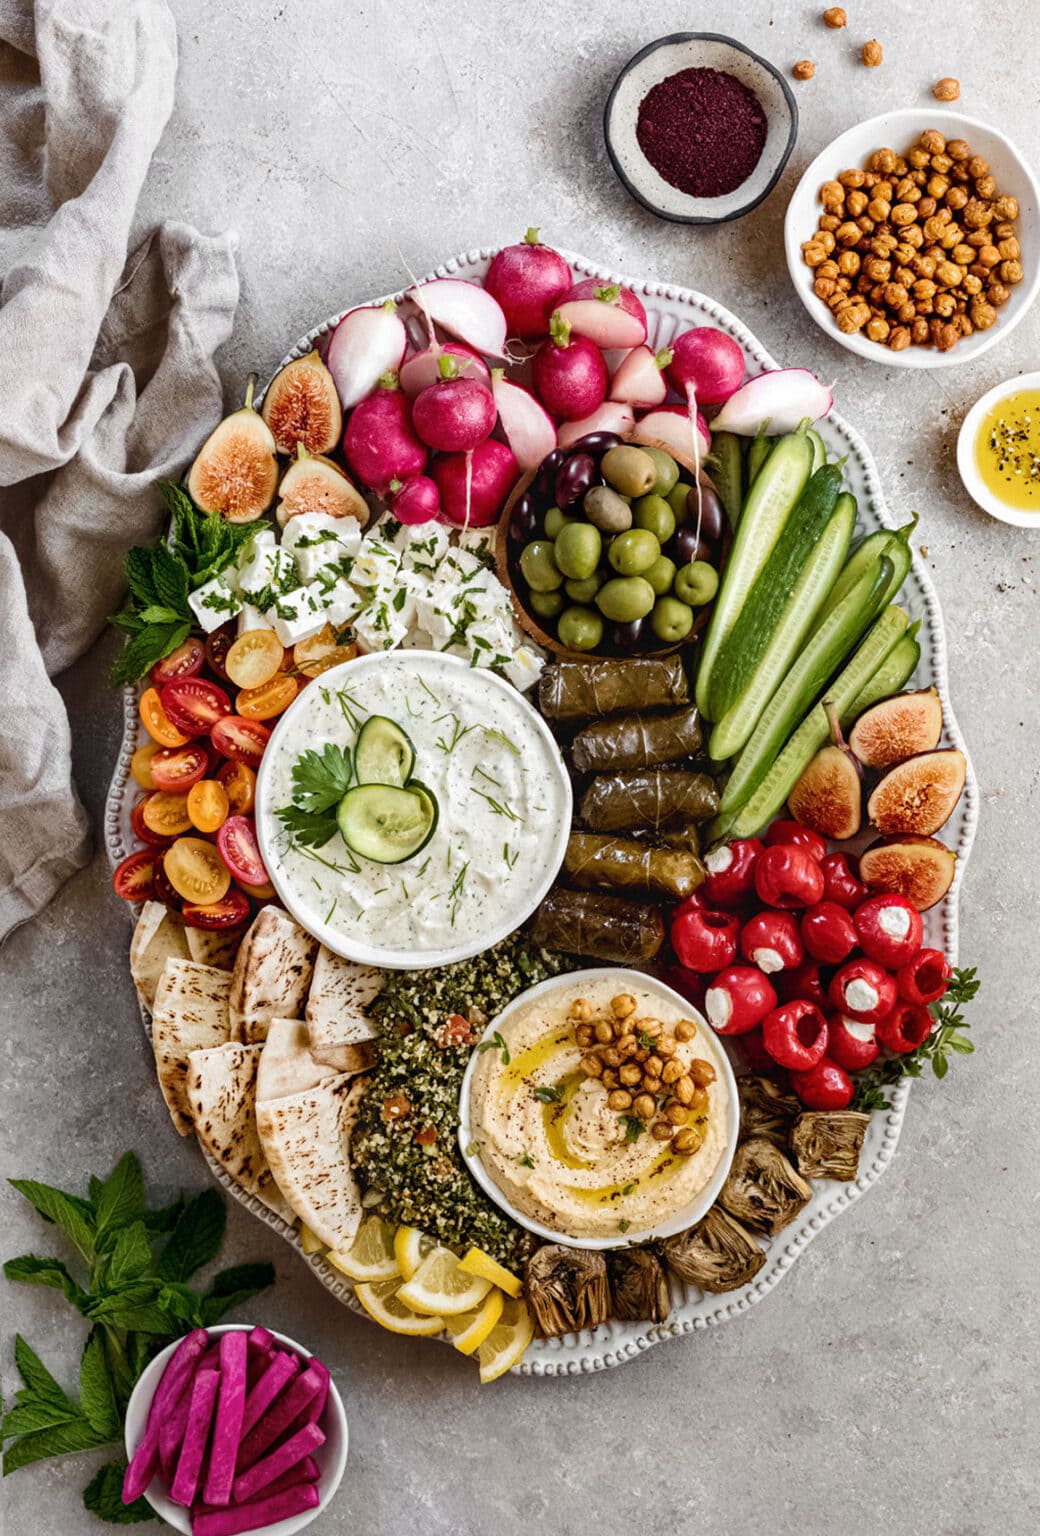 How to make a Mezze Platter - Yoga of Cooking